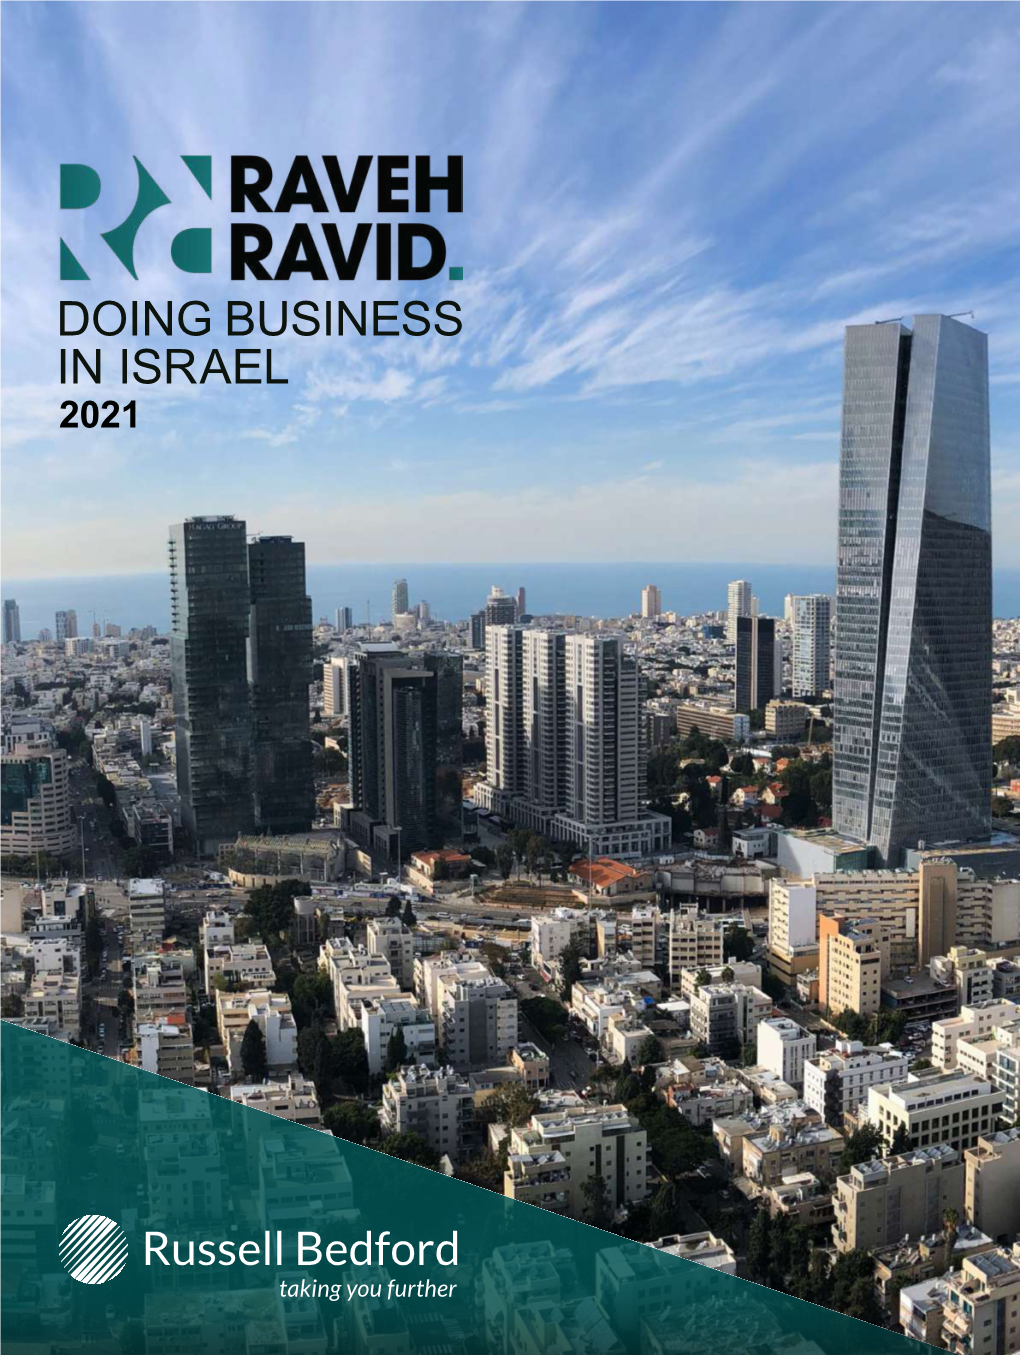 DOING BUSINESS in ISRAEL 2021 Contents